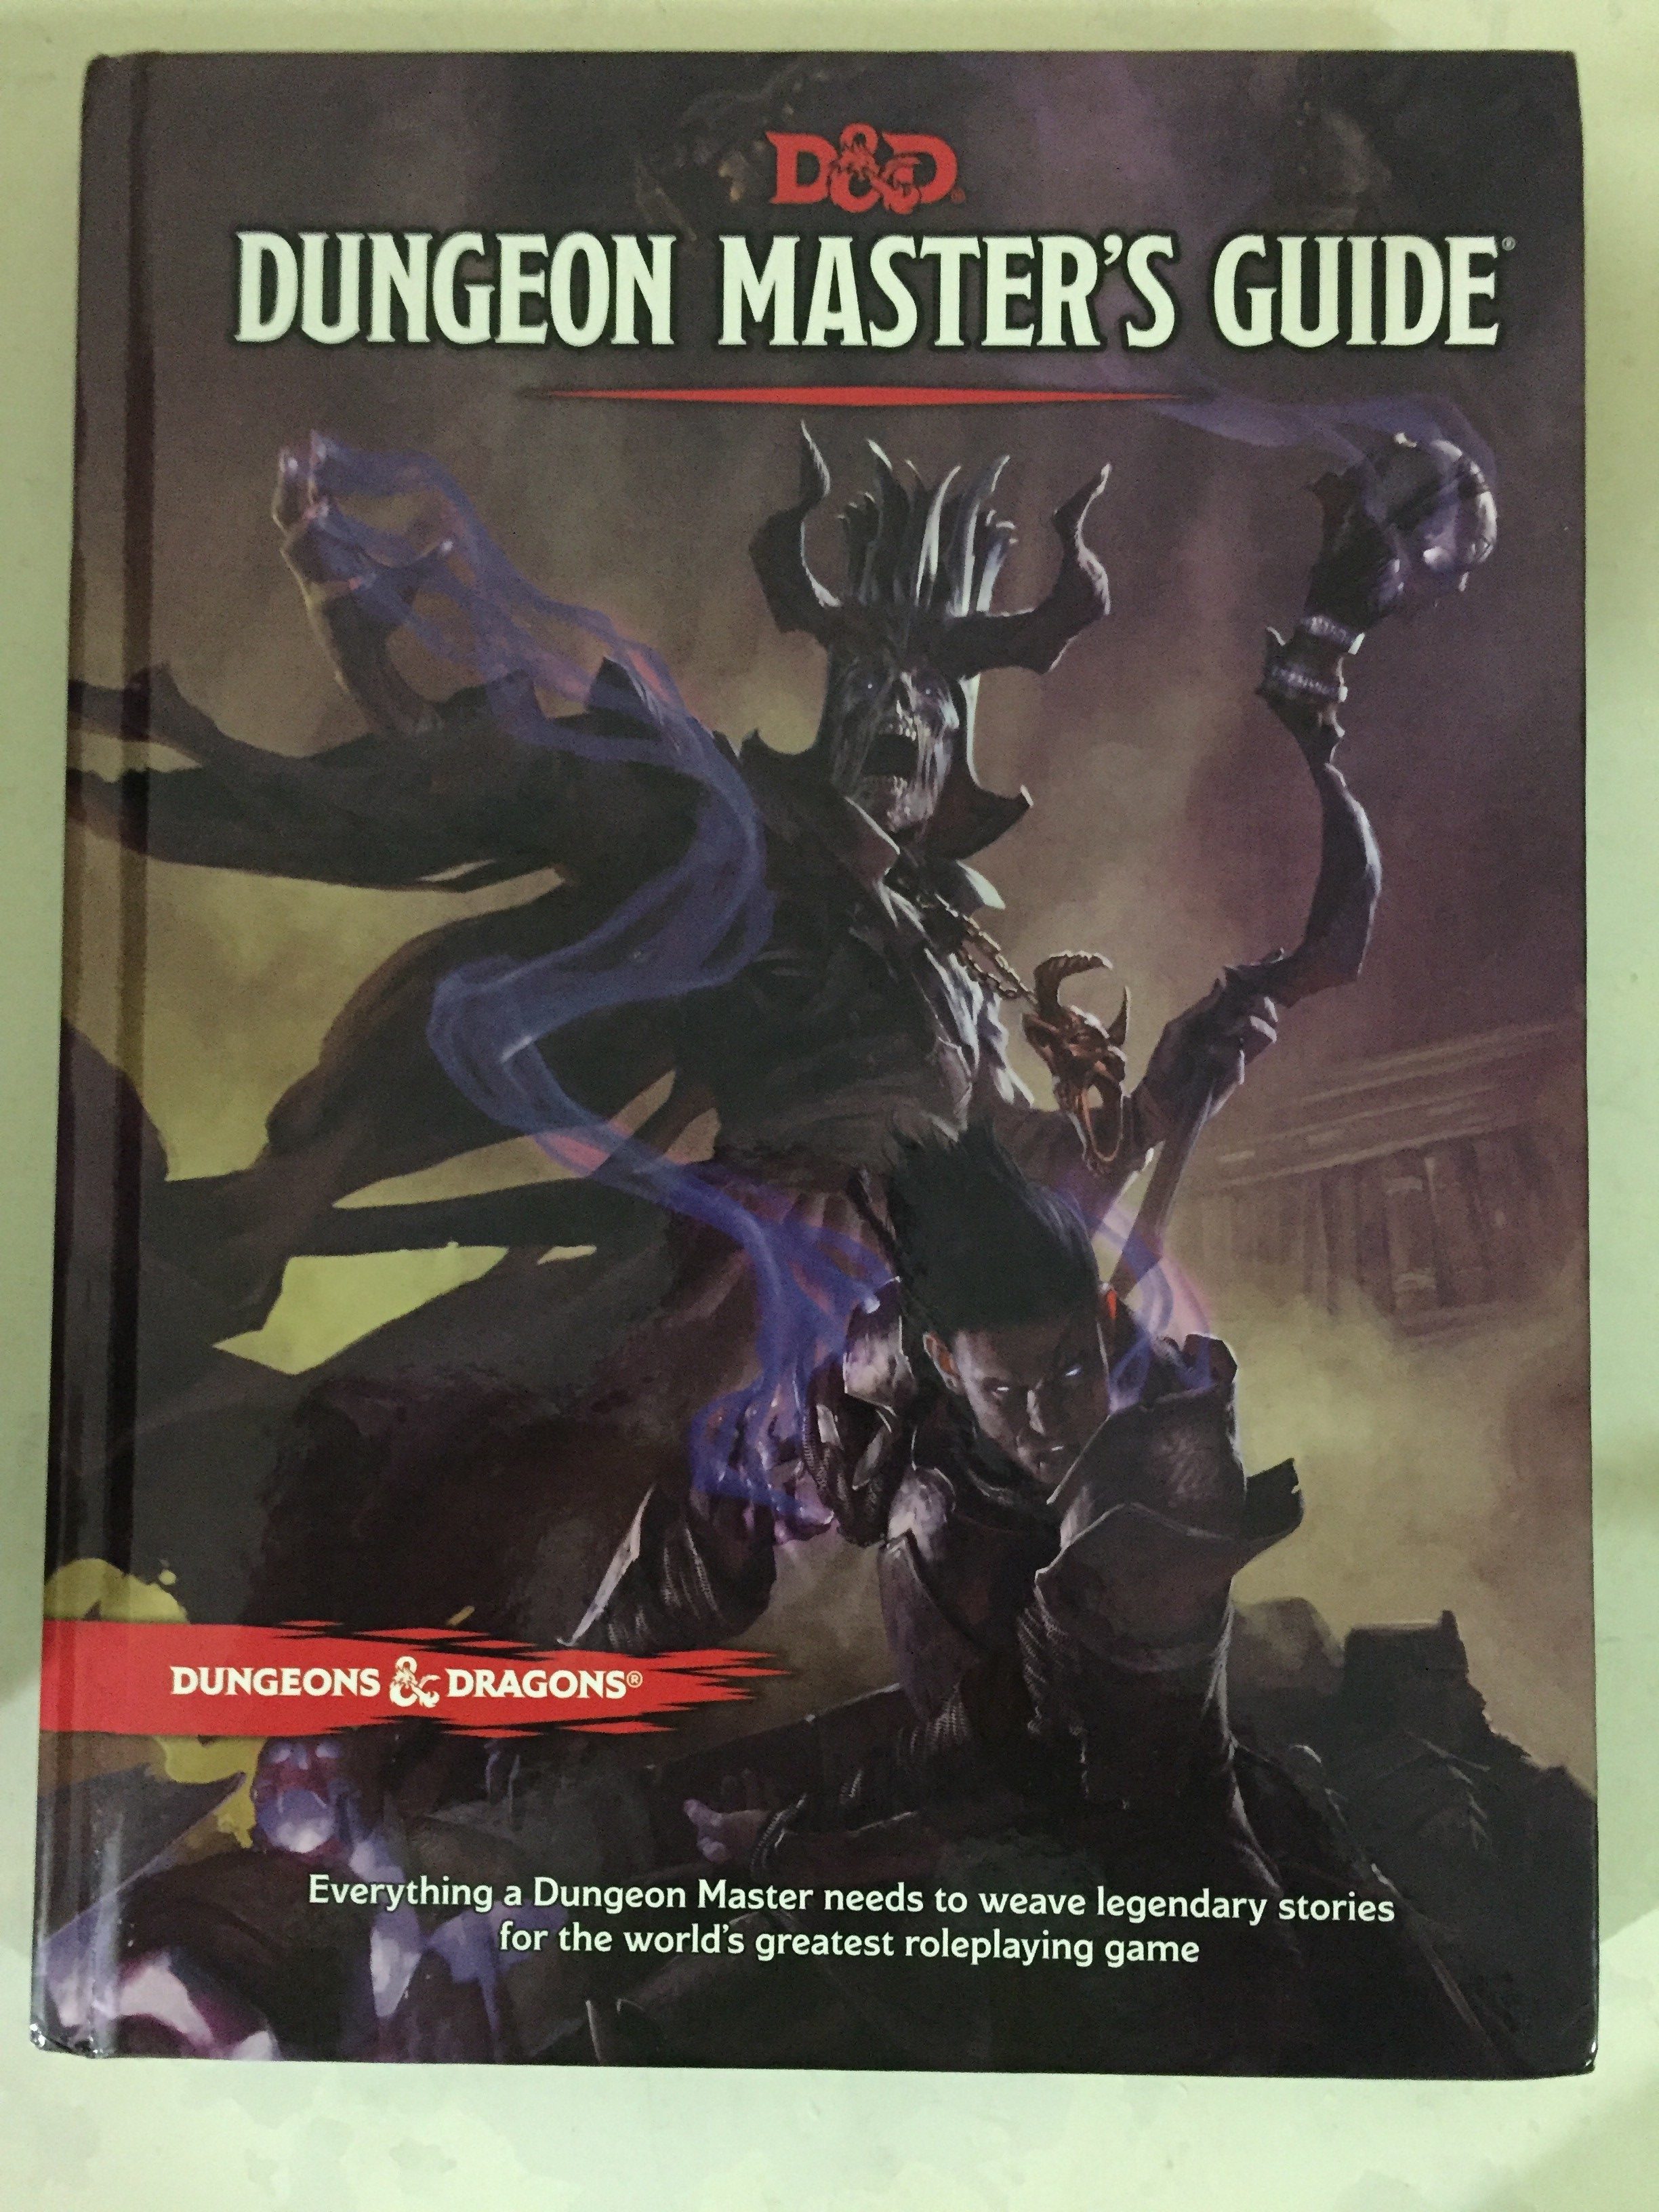 Front cover. (Dungeon Master's Guide for Dungeons & Dragons 5th Edition)